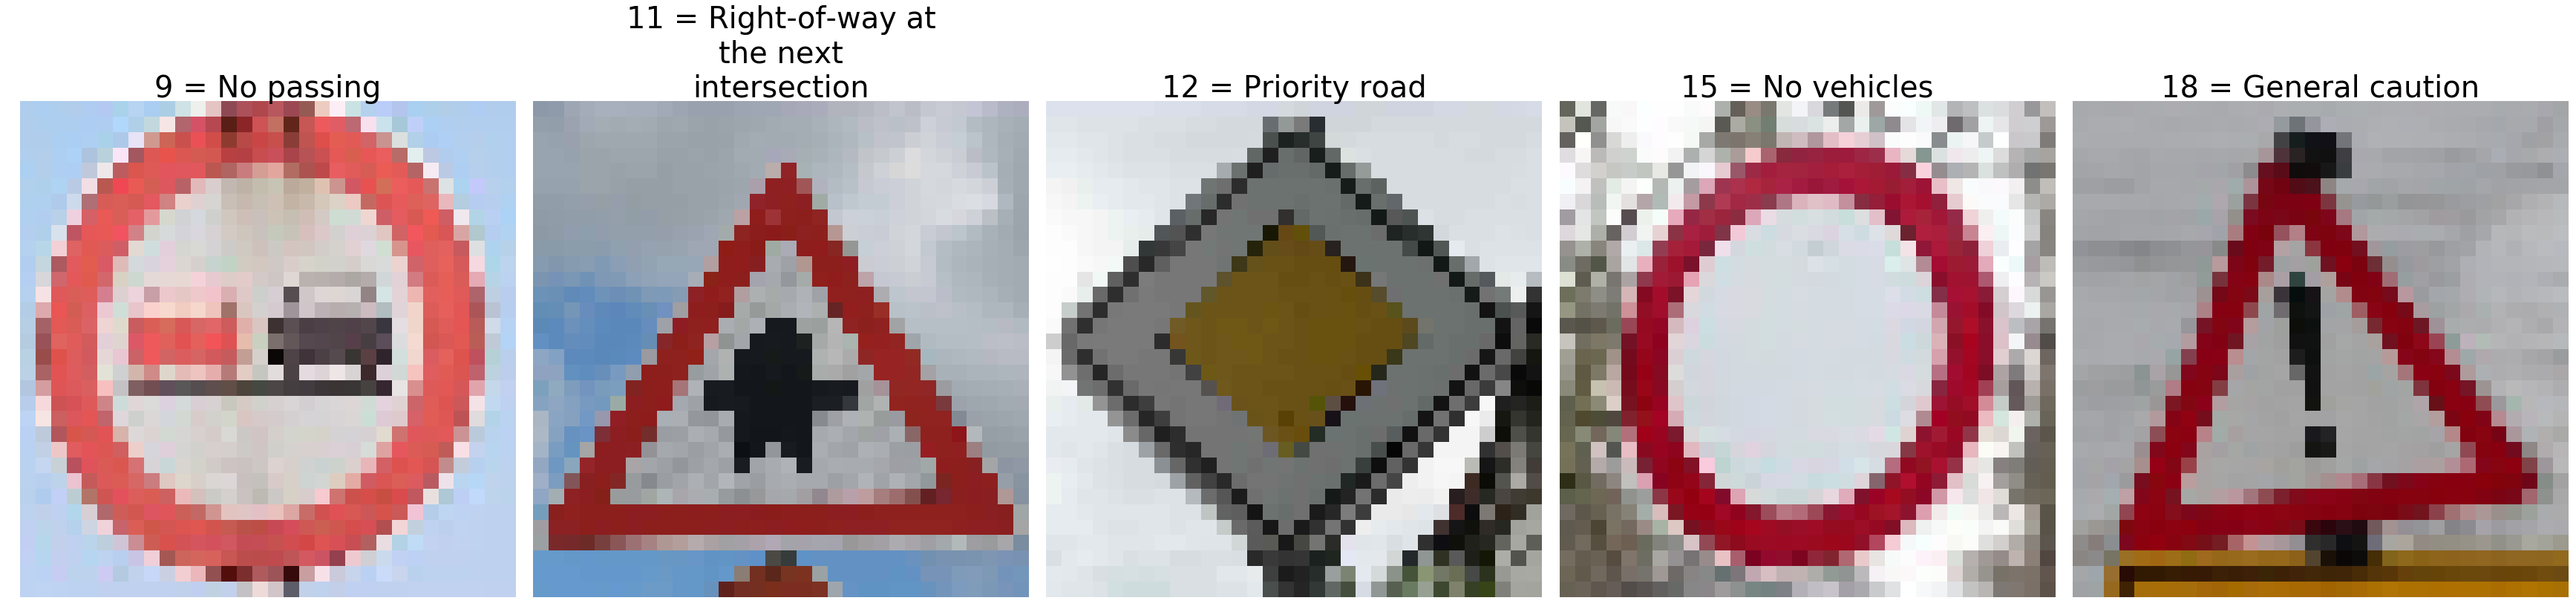 sign_examples.png